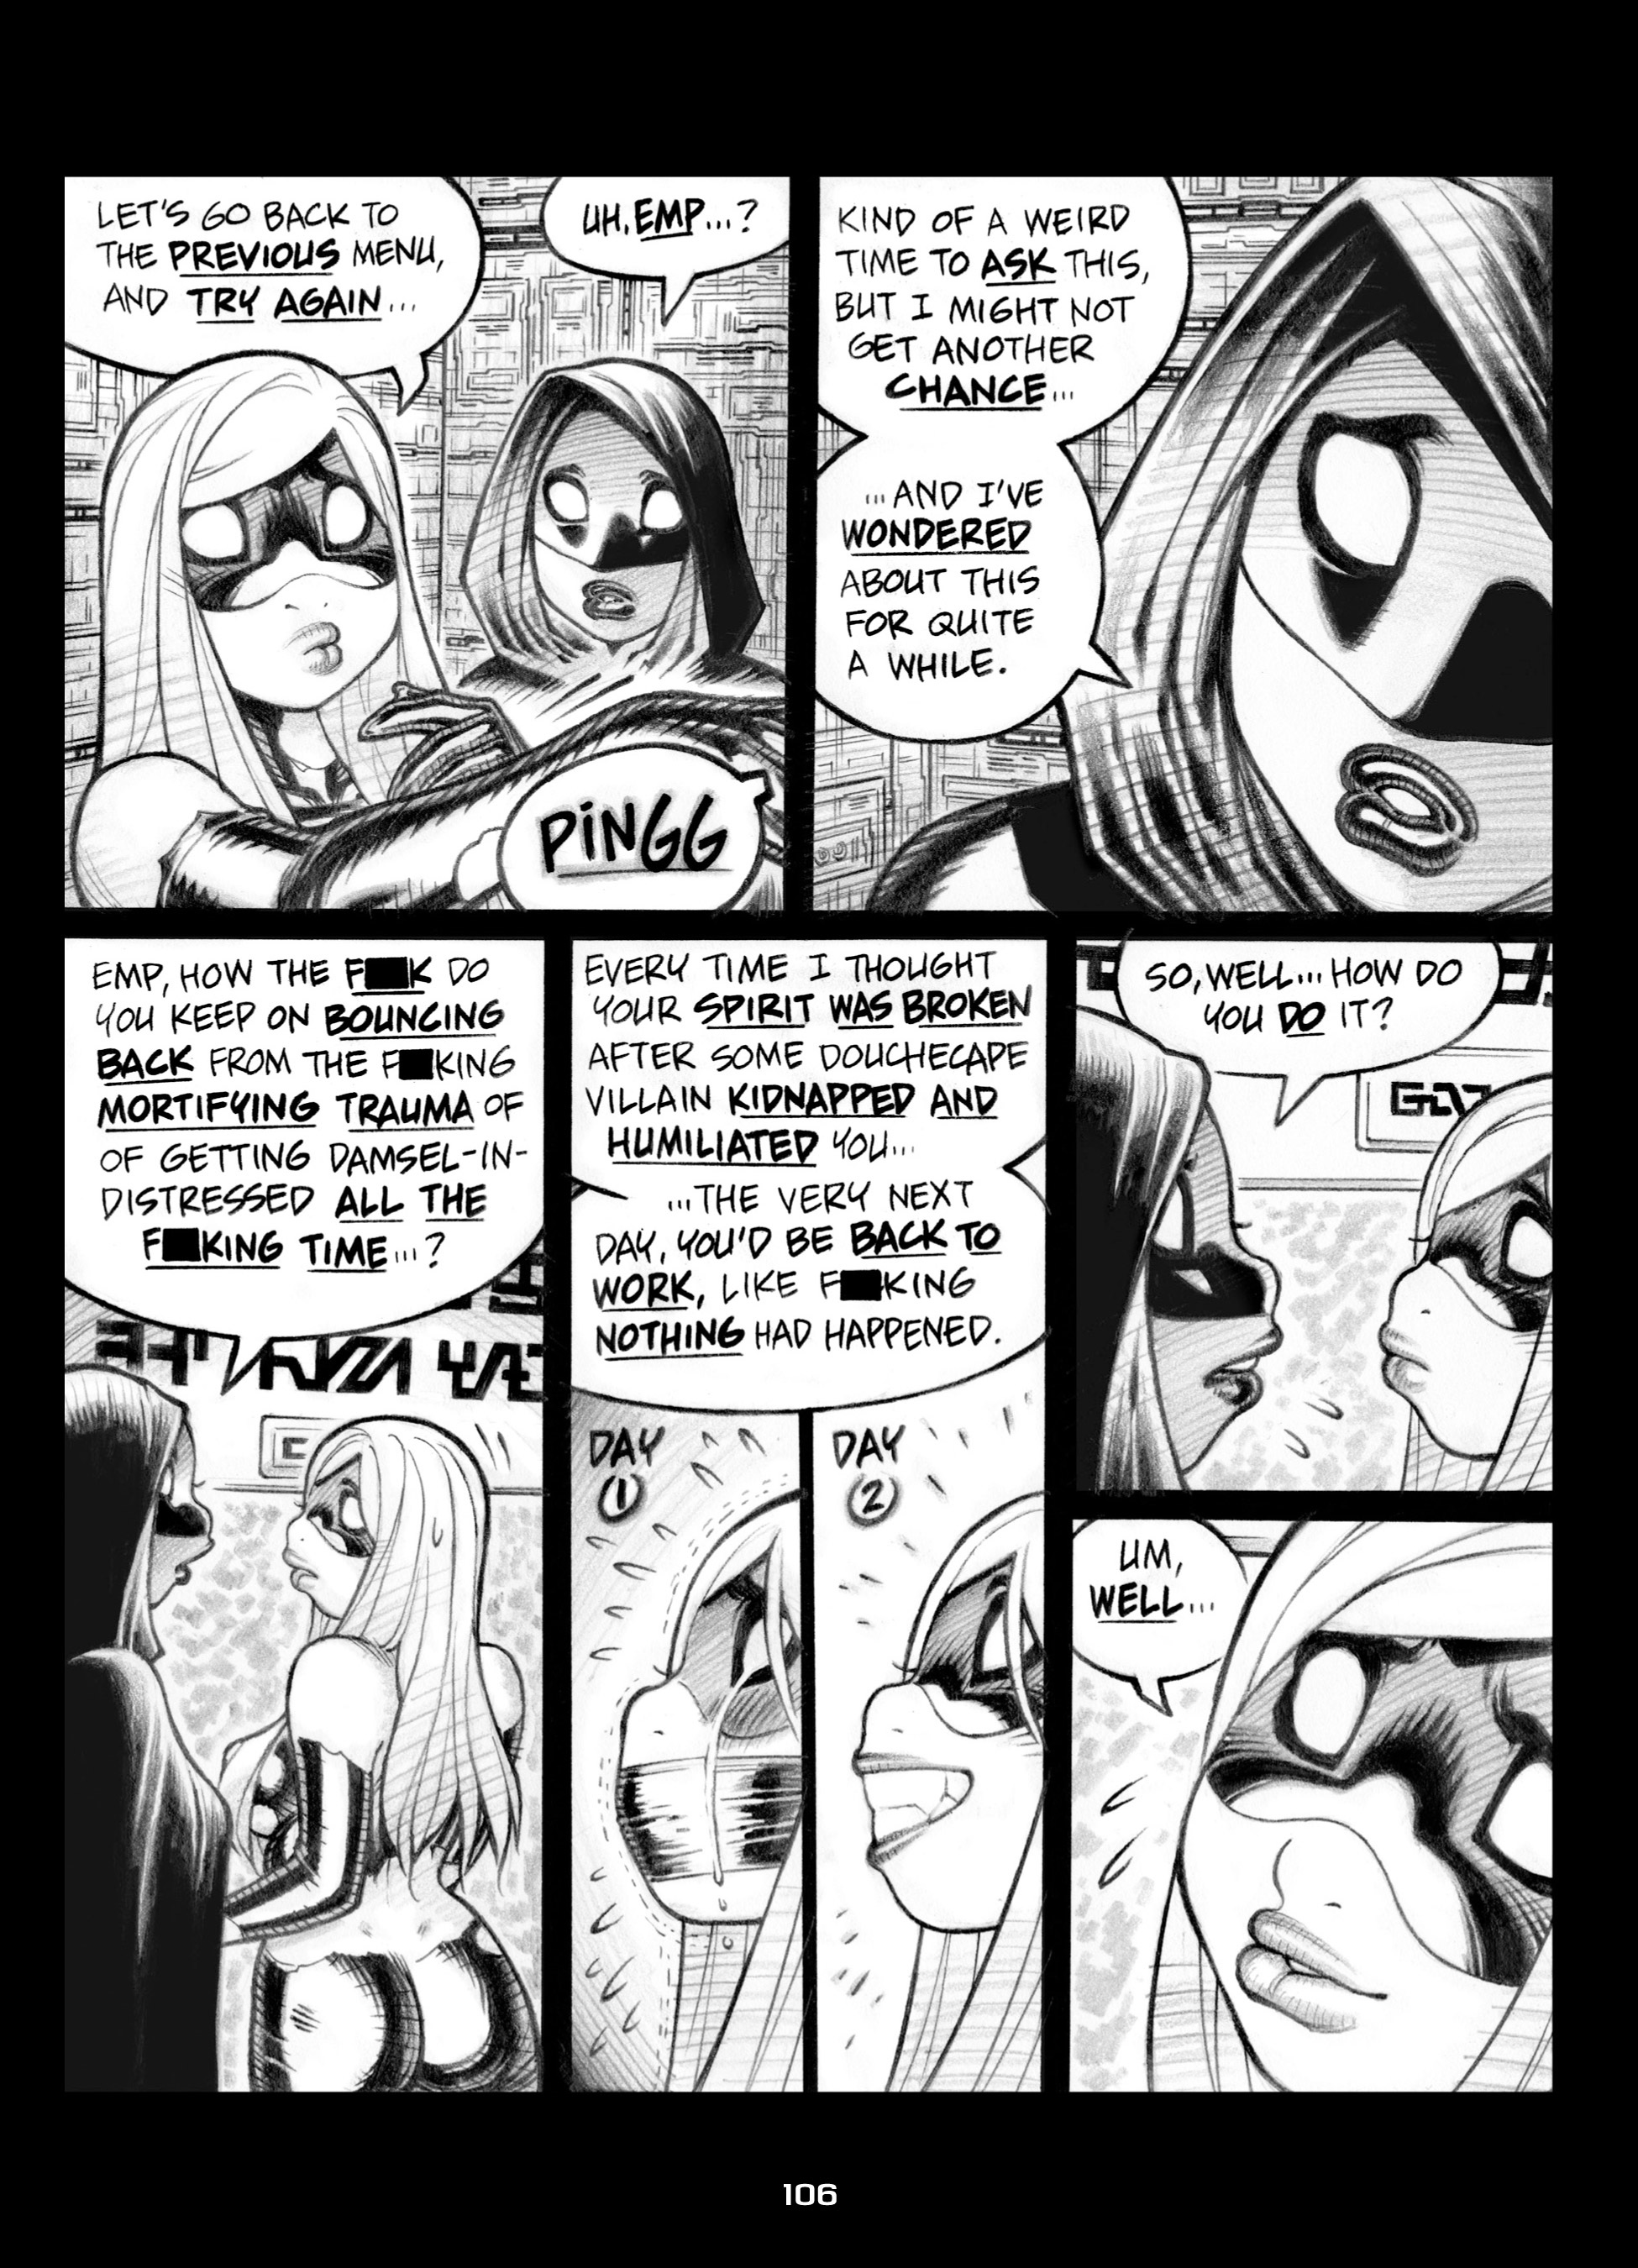 Read online Empowered comic -  Issue #8 - 106